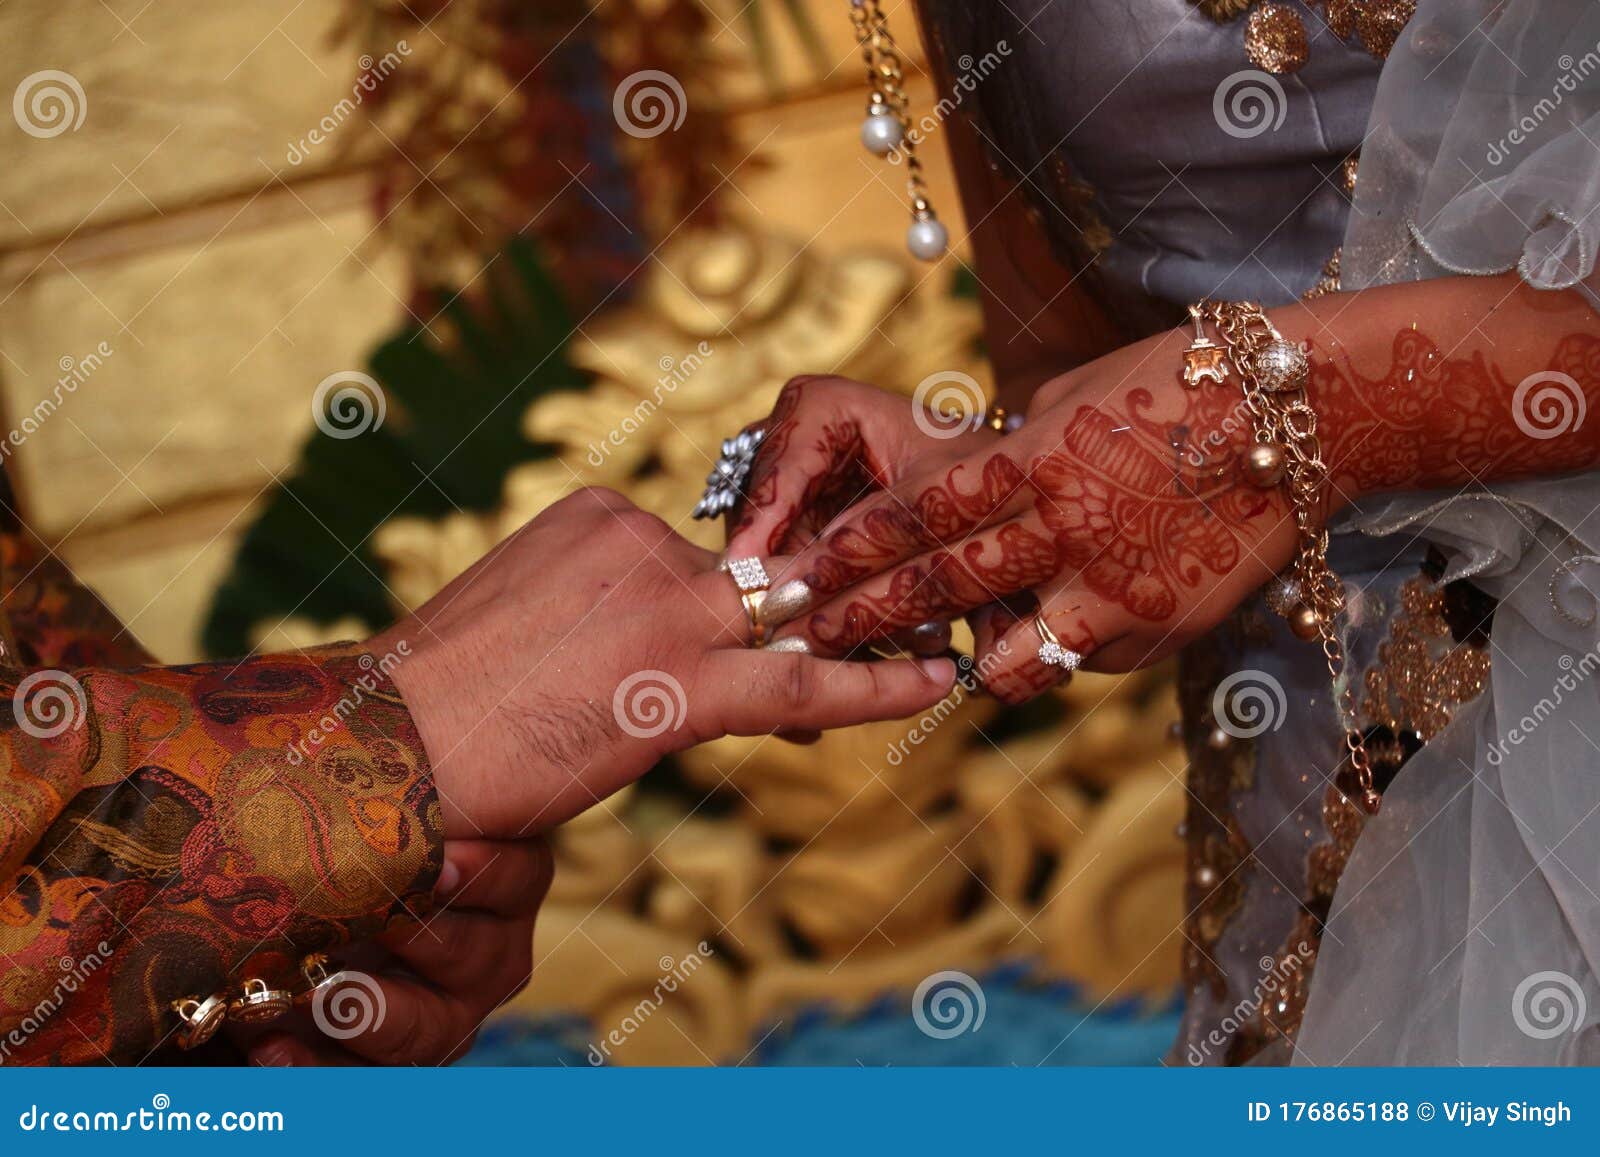 Engagement Rings Couples Indian Ring Ceremony Stock Photo 1390357076 |  Shutterstock